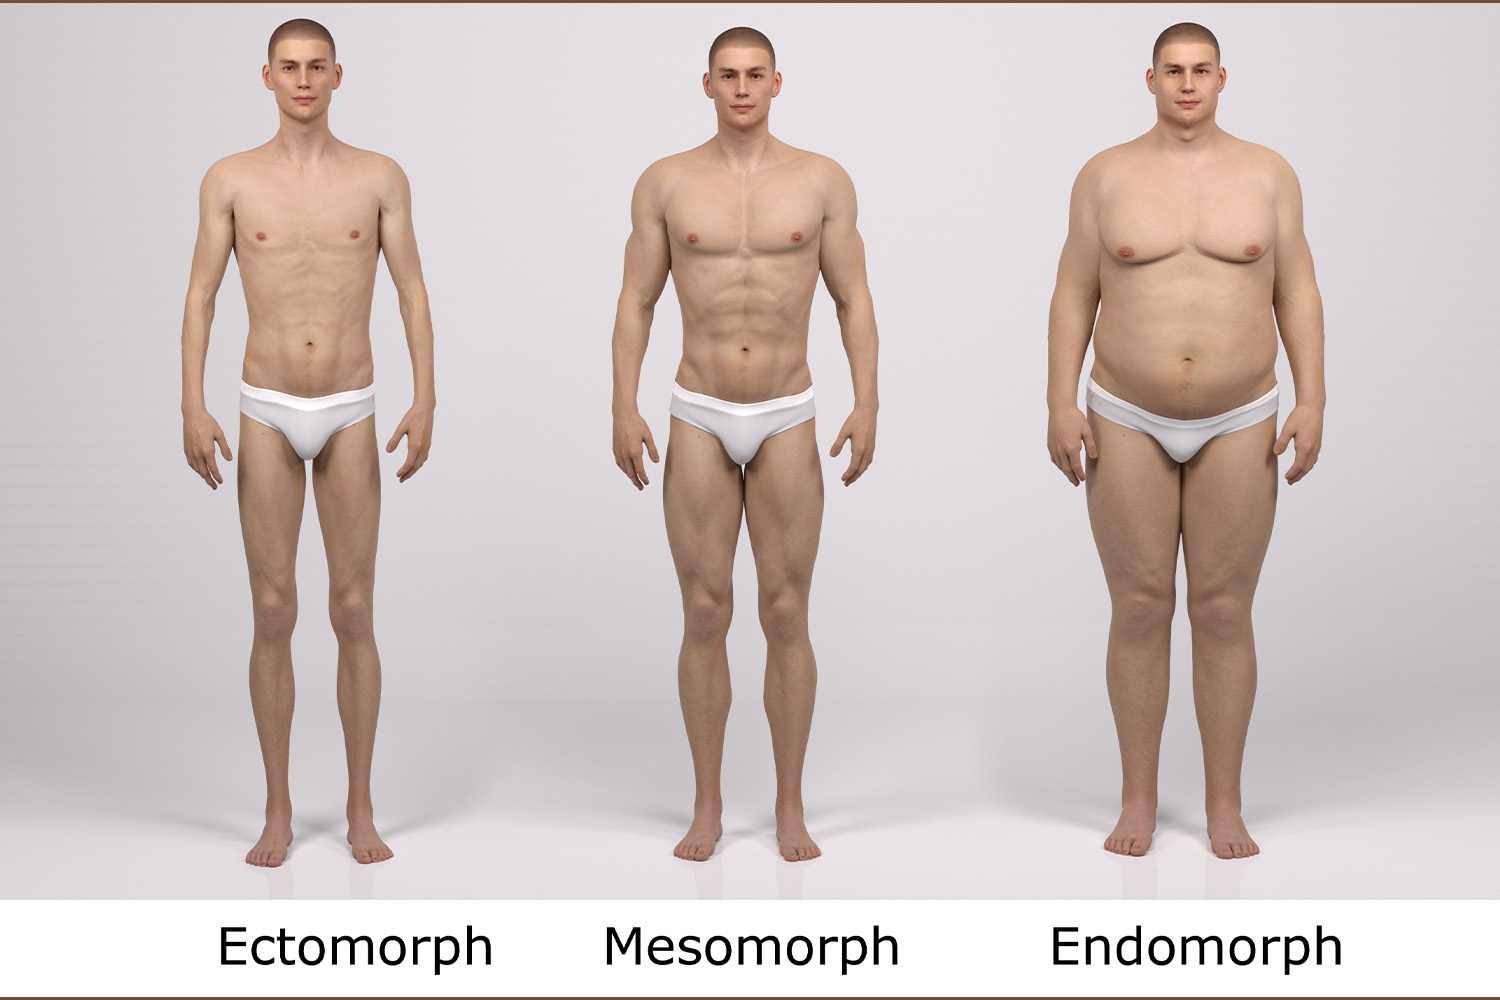 Different Body Types  Are You An Ectomorph, Endomorph, or Mesomorph?